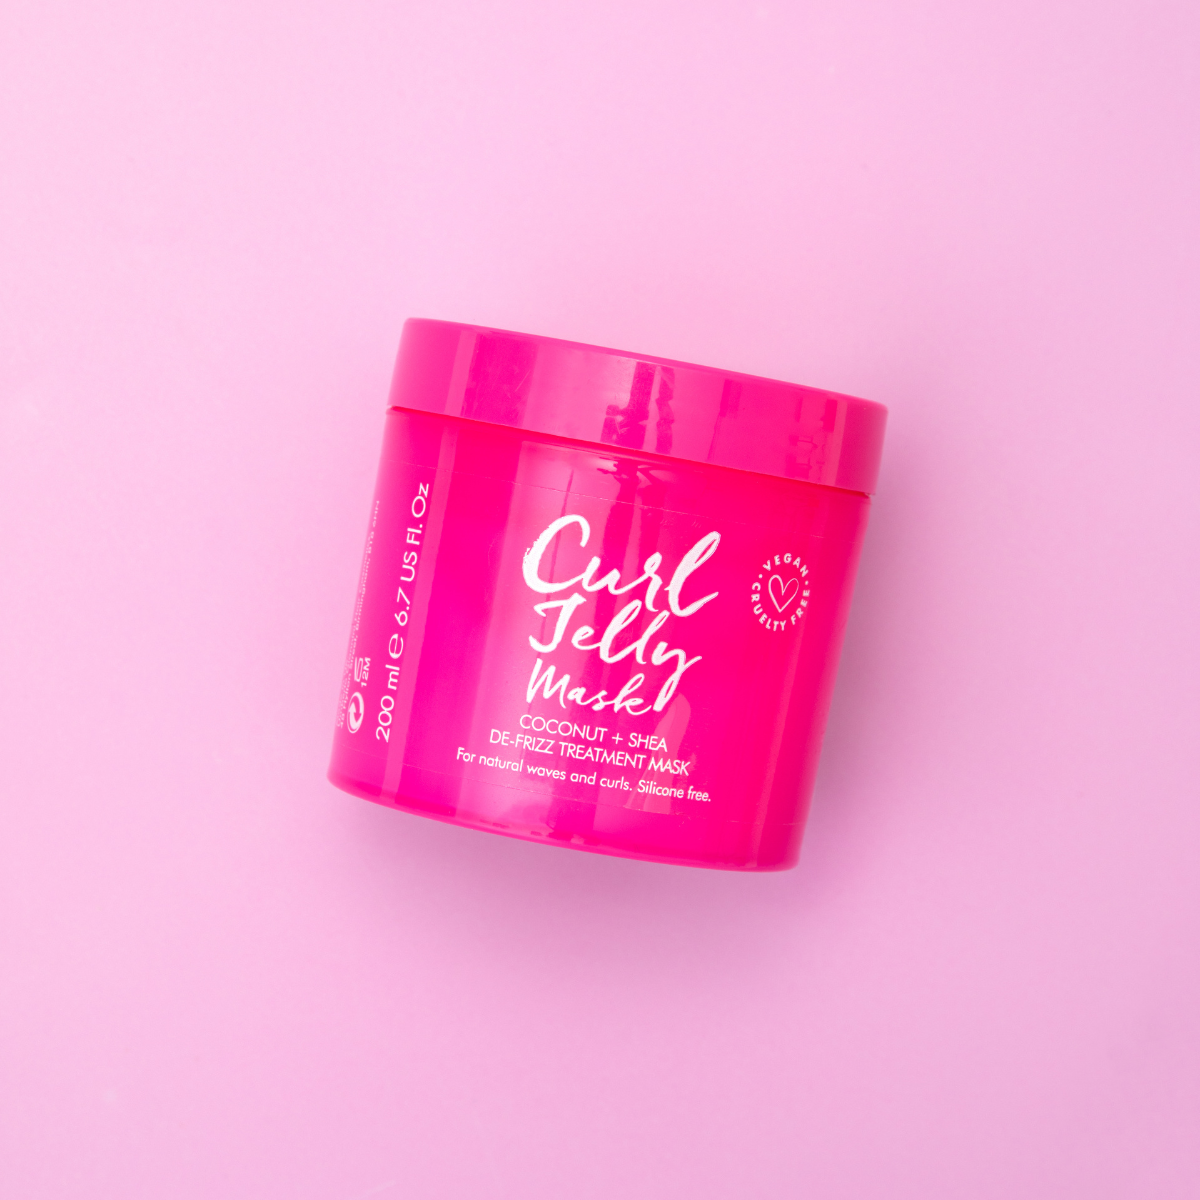 Curl Jelly Mask